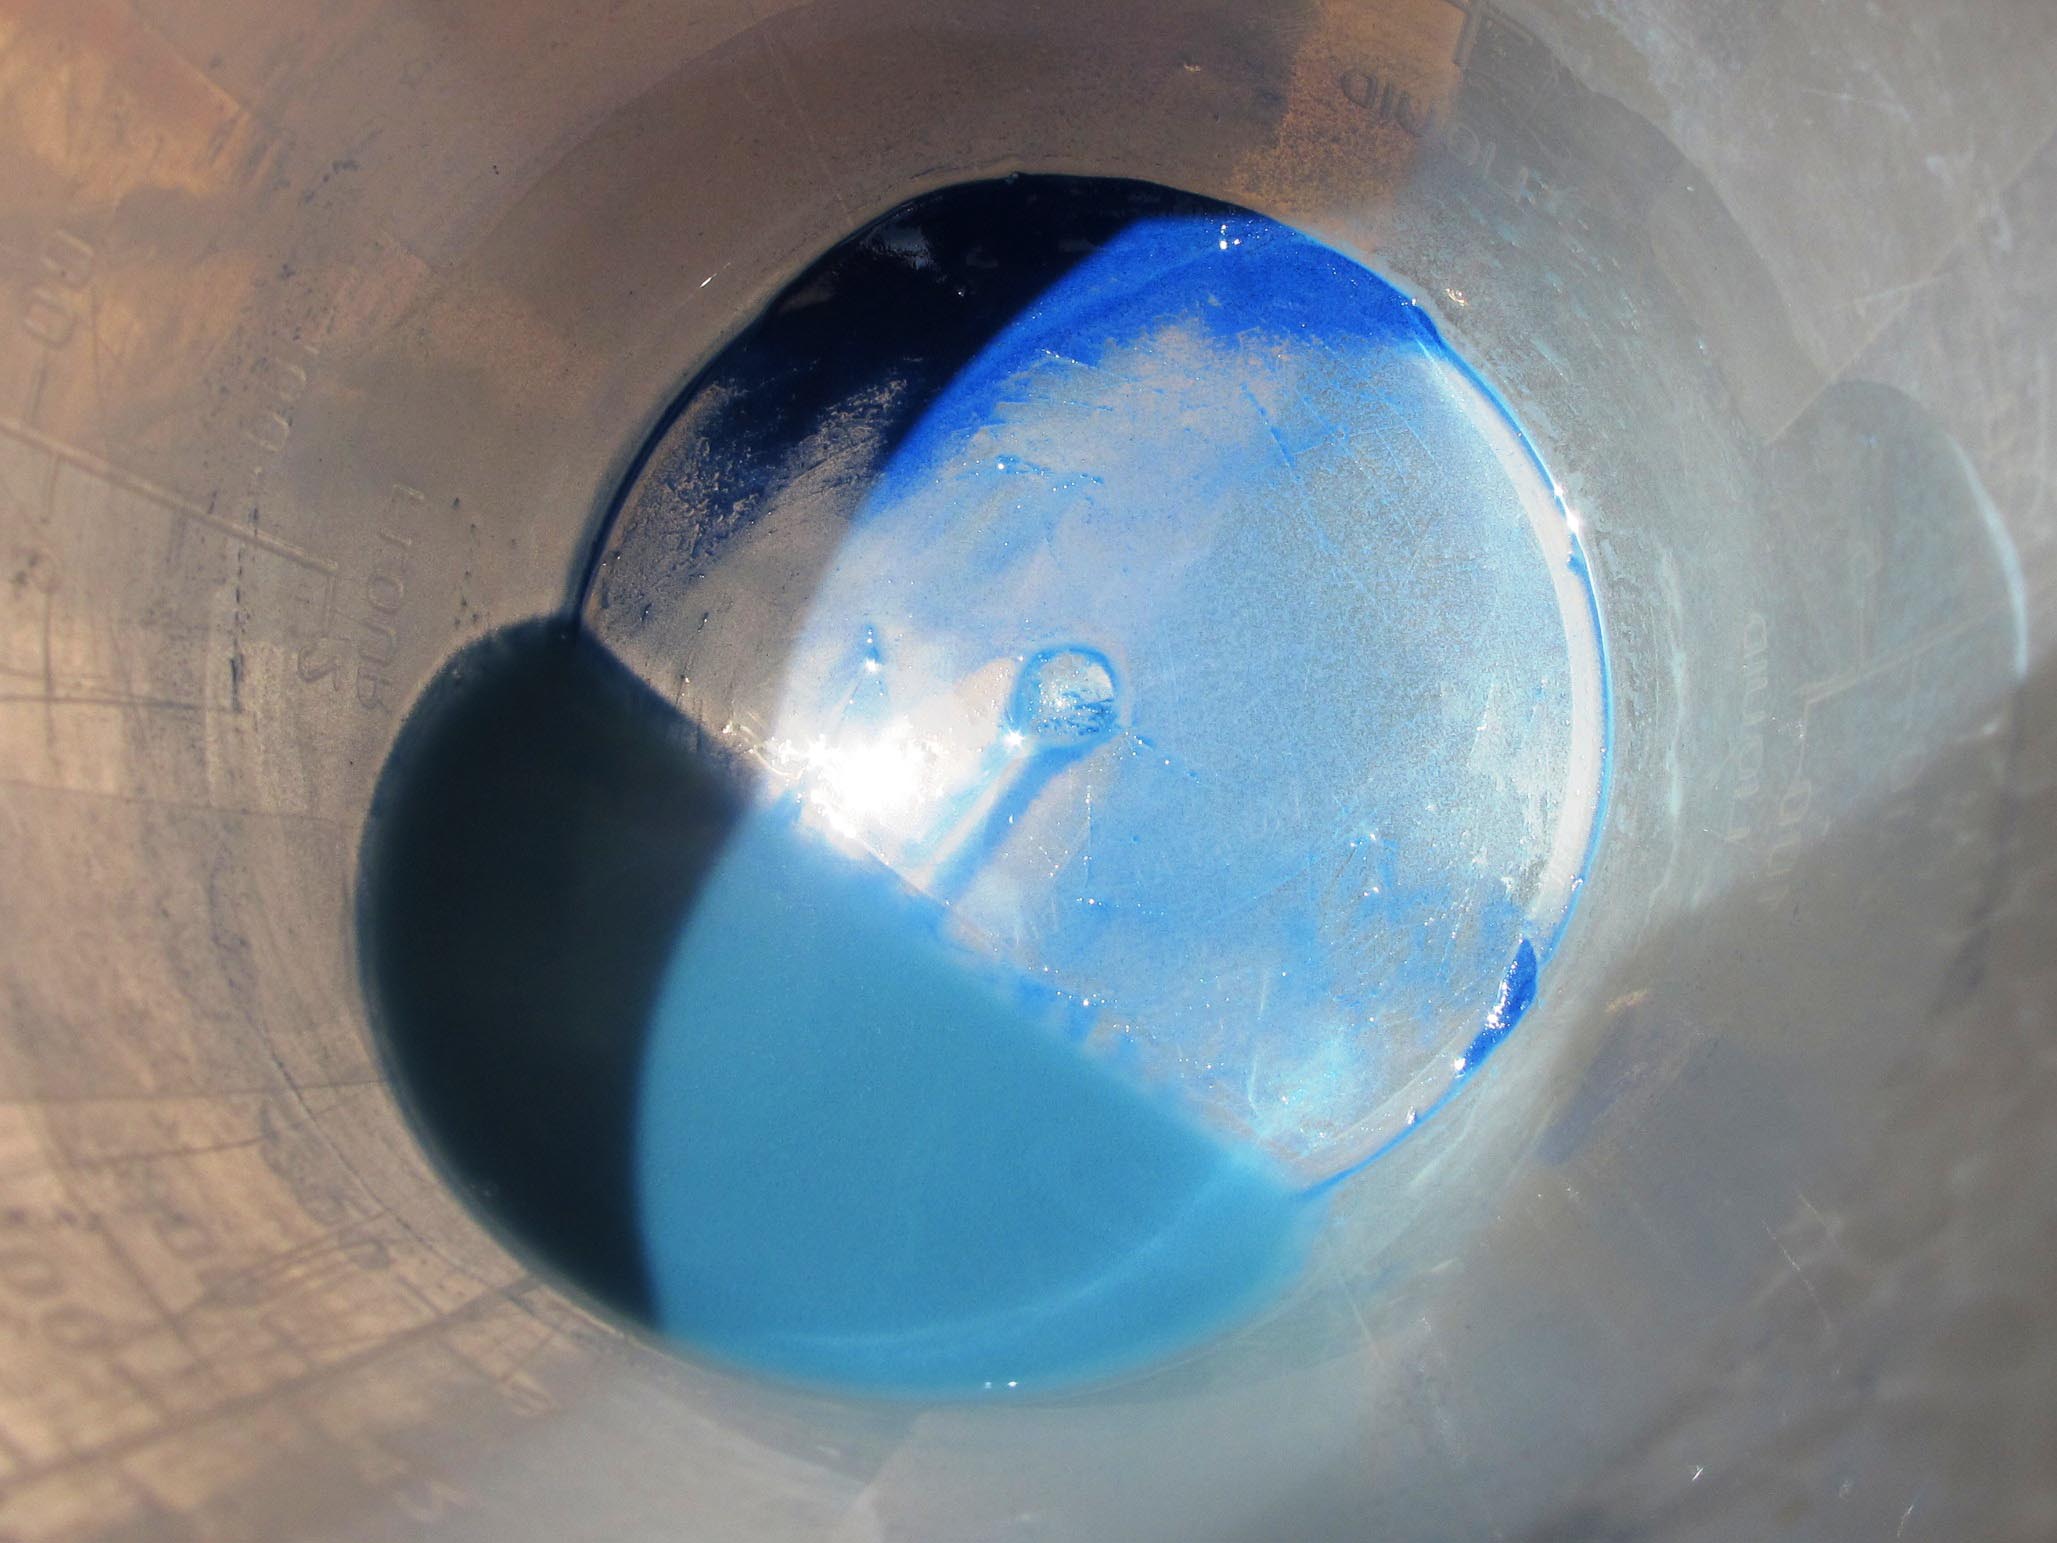 particles in the bottom of the jug